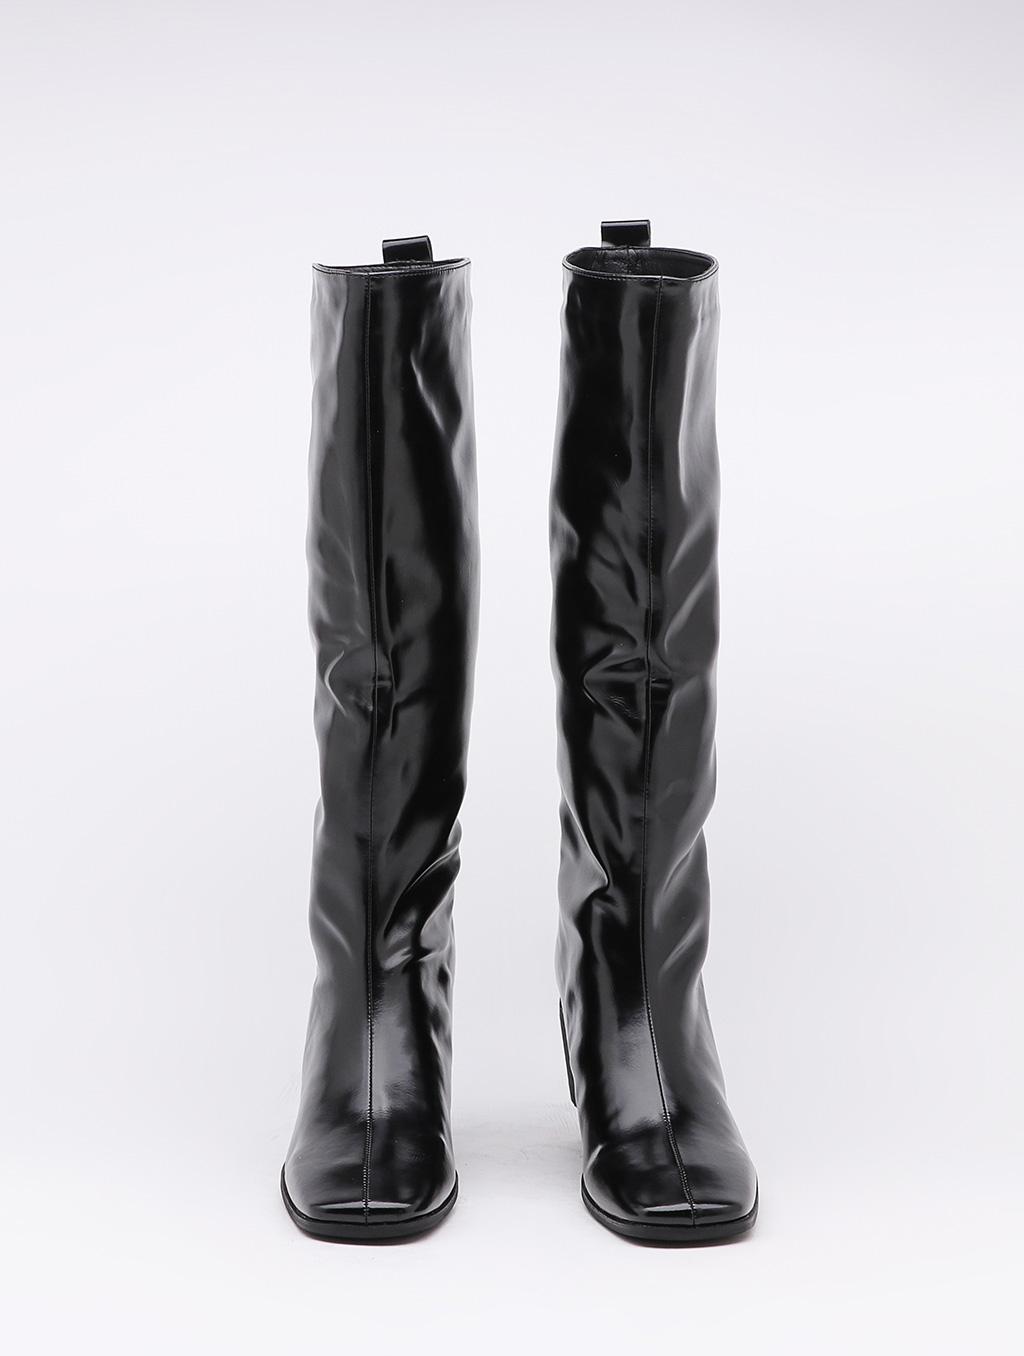 Lattelier Square Toe Knee High Boots in Black | Lyst